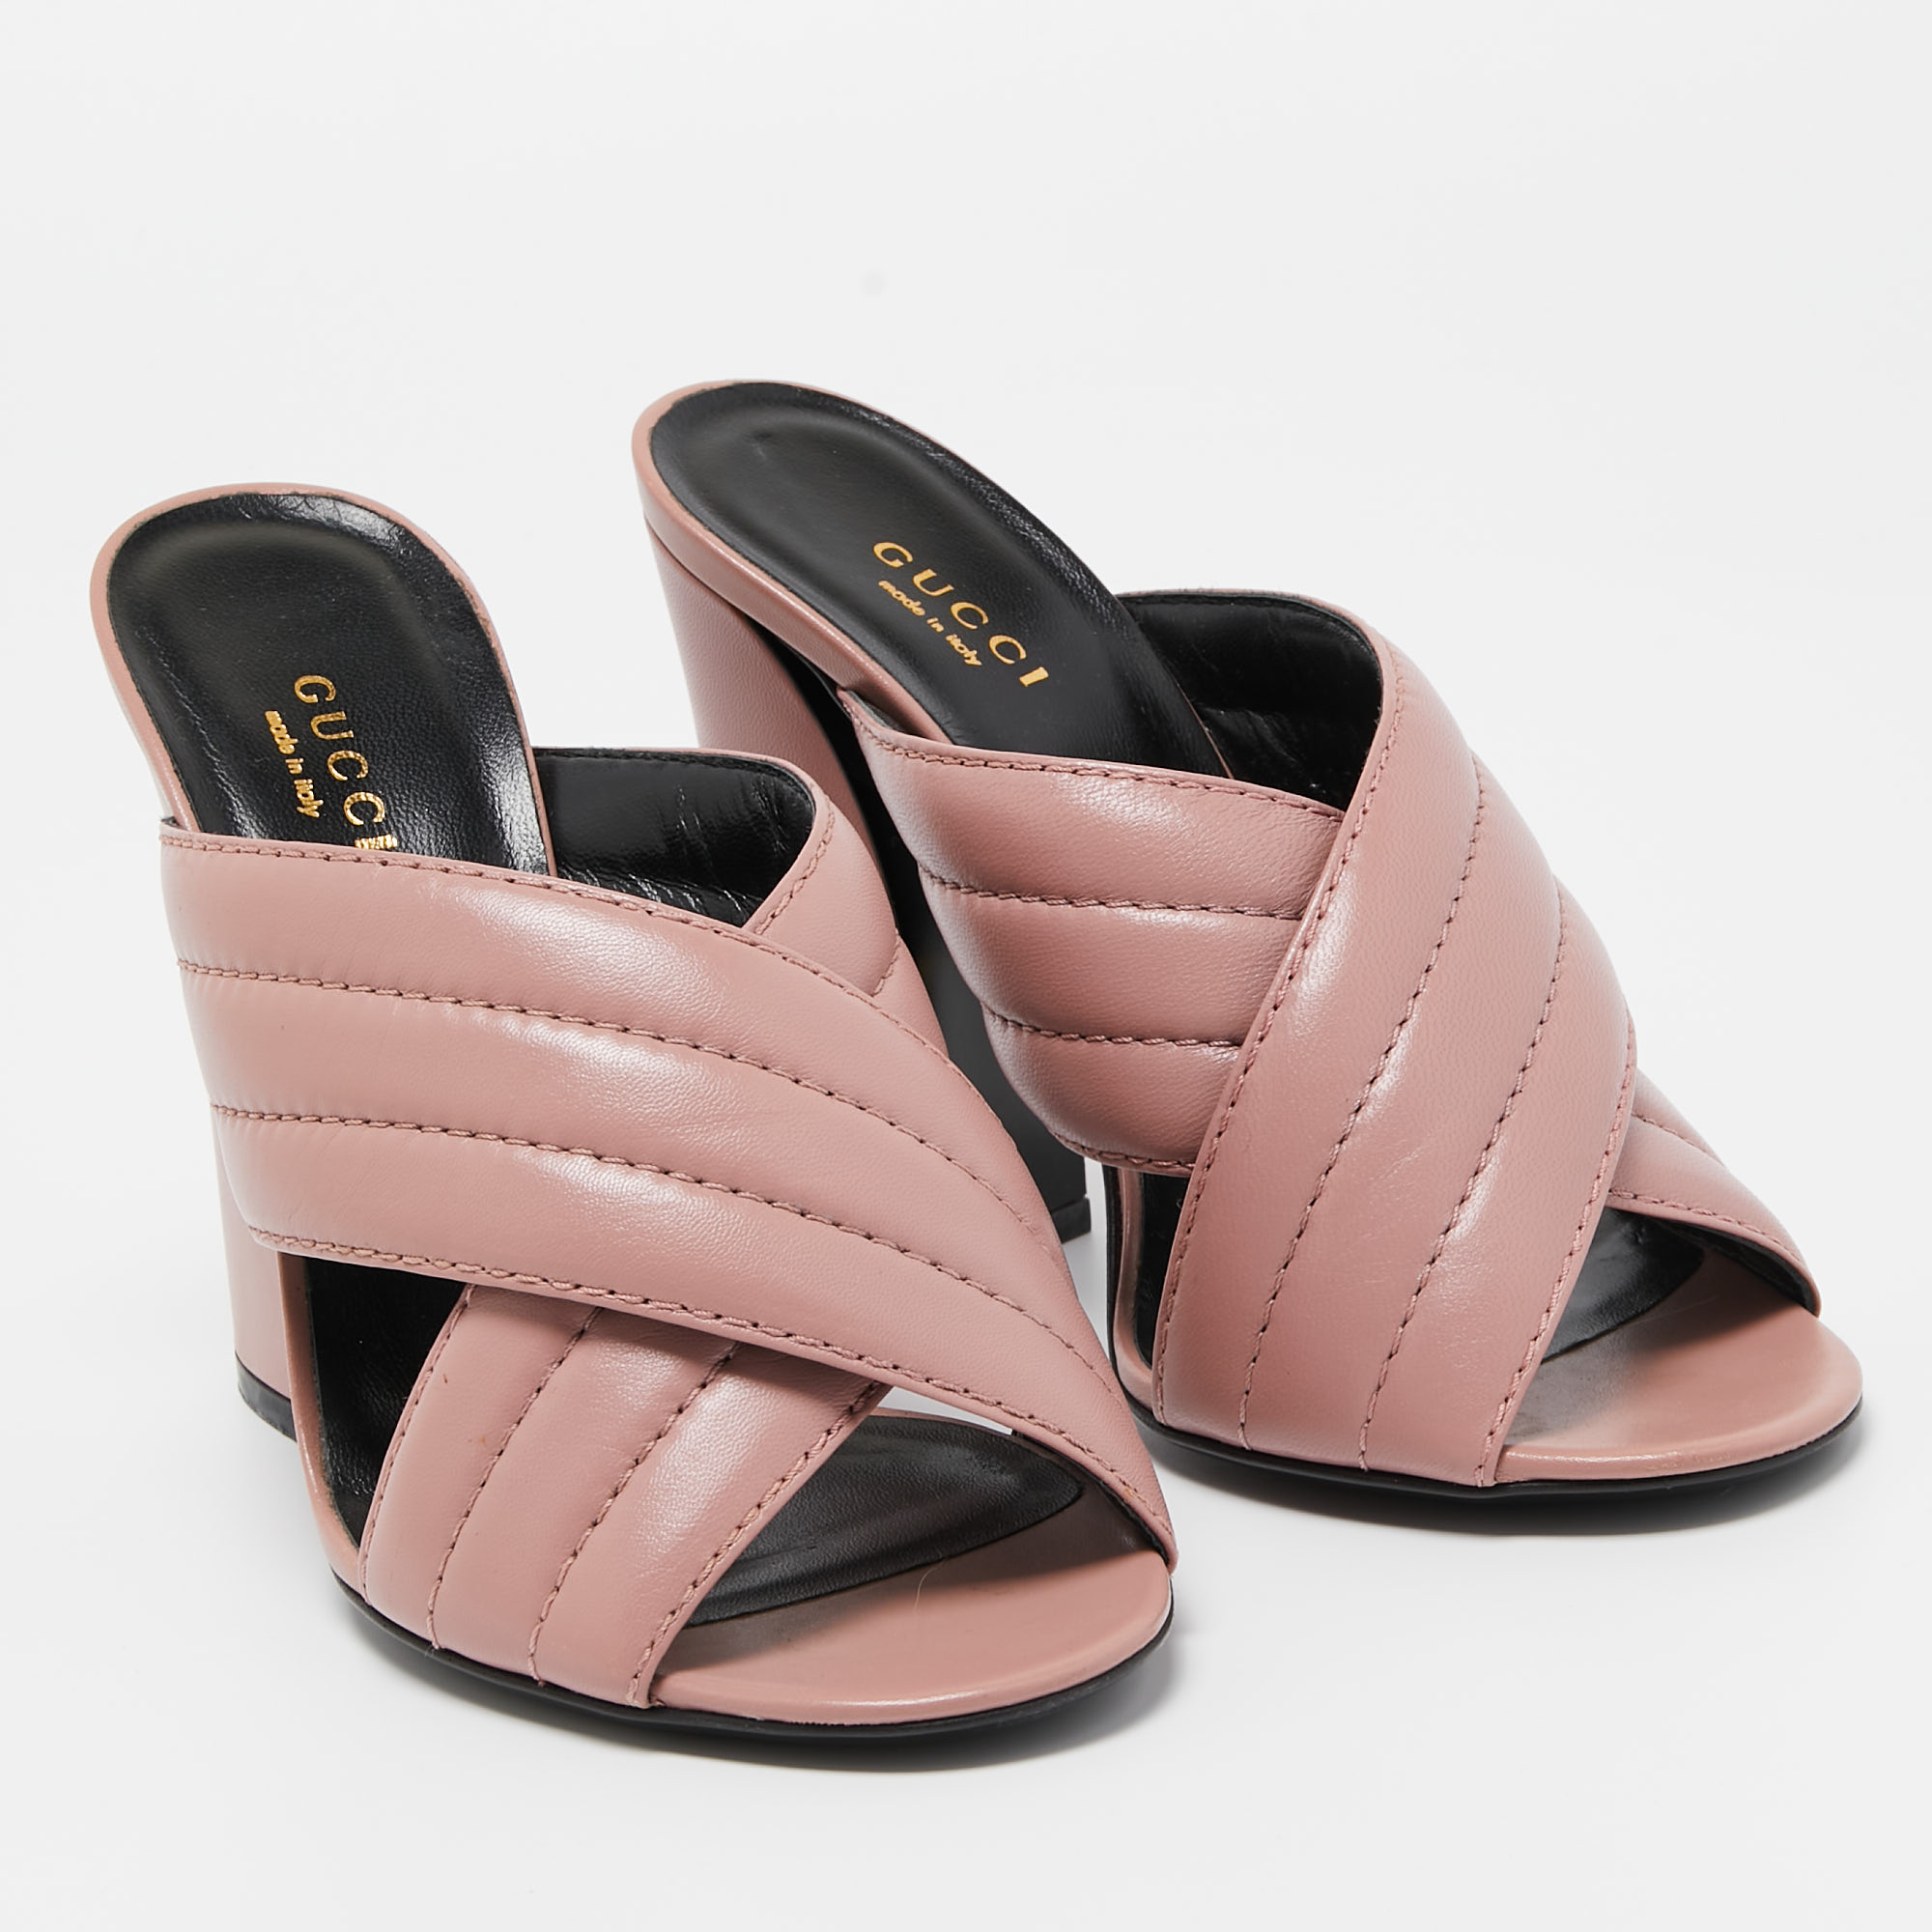 Gucci Pink Quilted Leather Webby Slide Sandals Size 38.5